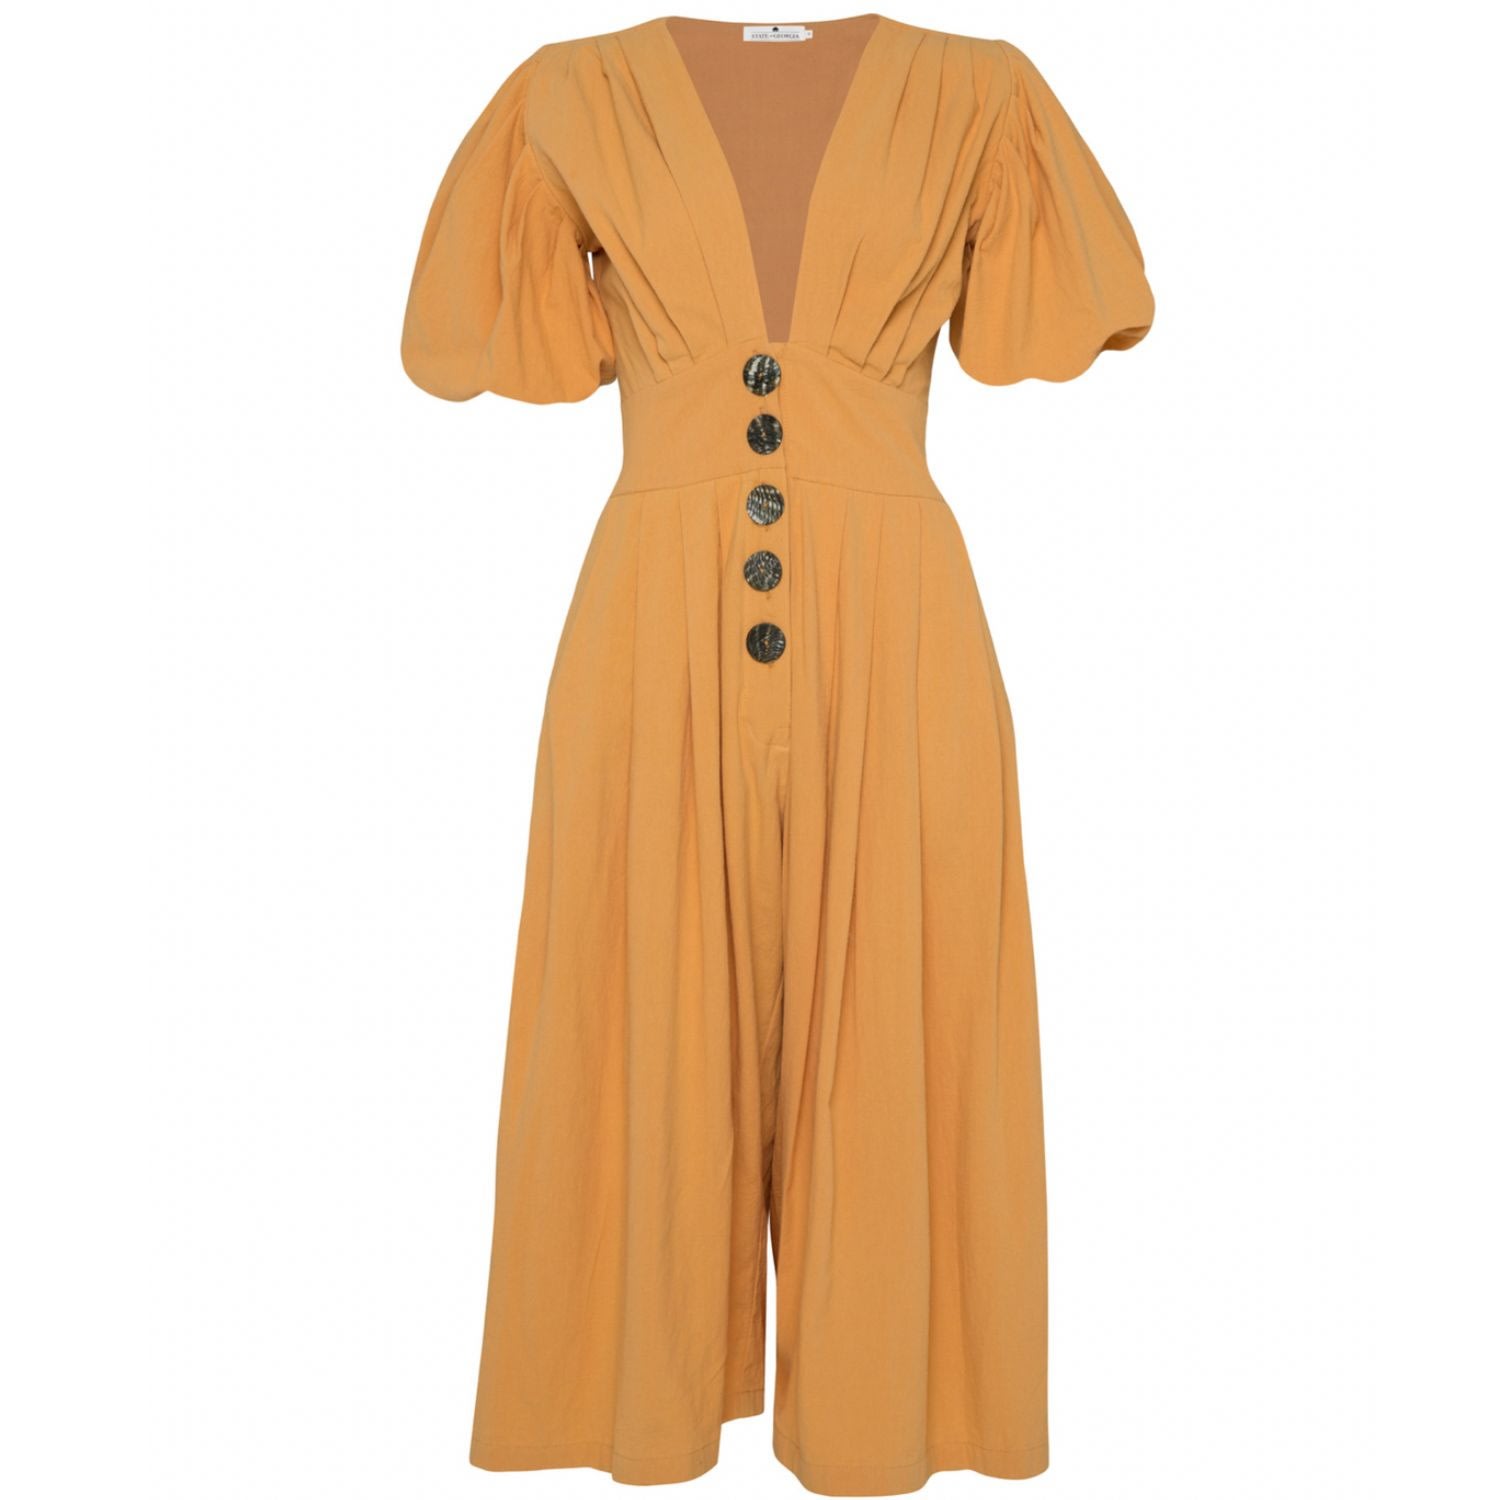 Women's Yellow / Orange The Jaime Jumpsuit Cullotes Tan/Charcoal Button Extra Small State of Georgia